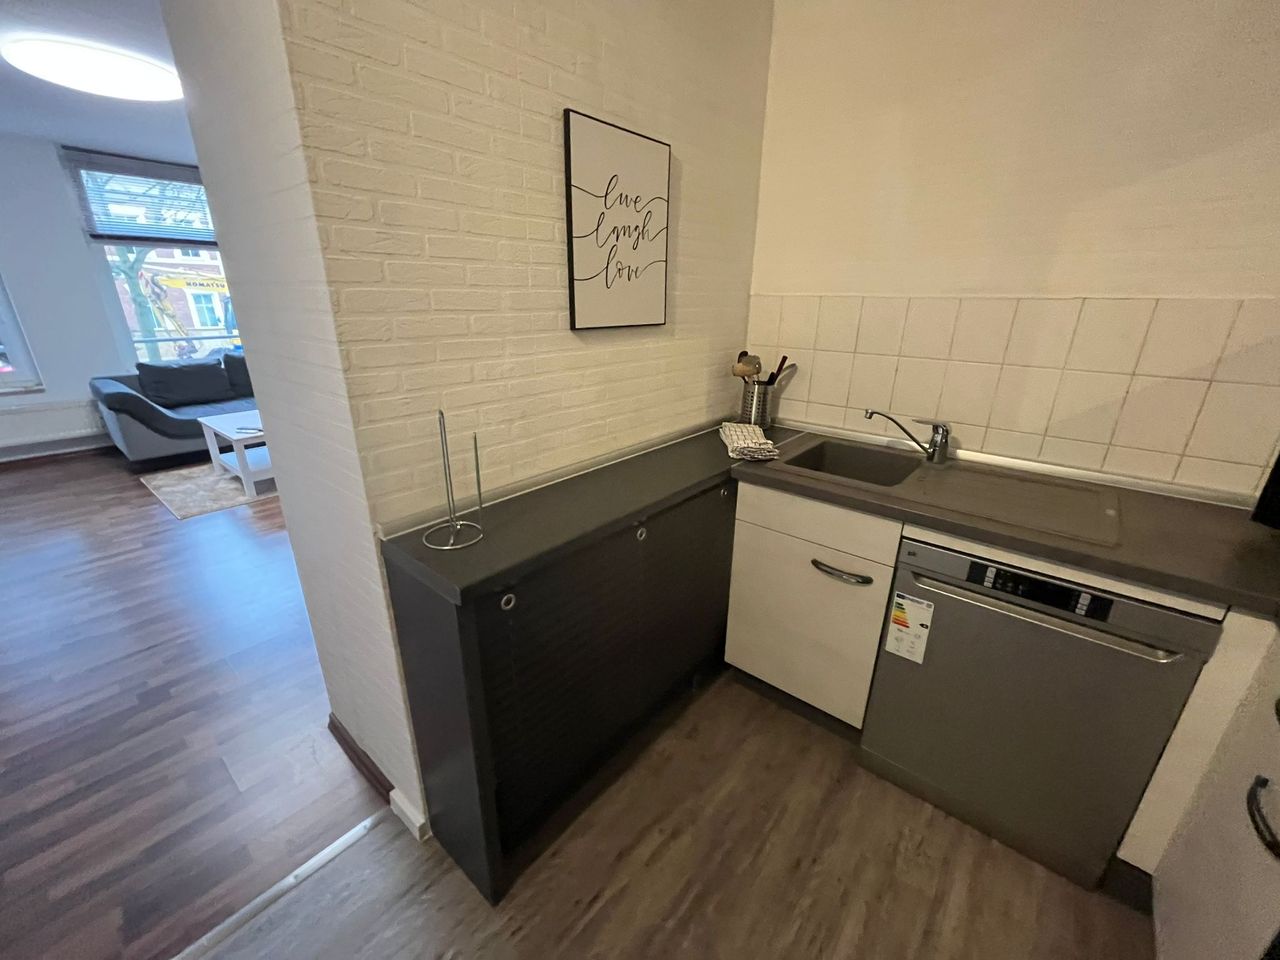 Fully furnished awesome Homeoffice flat in Altglienicke next to Station Grünau